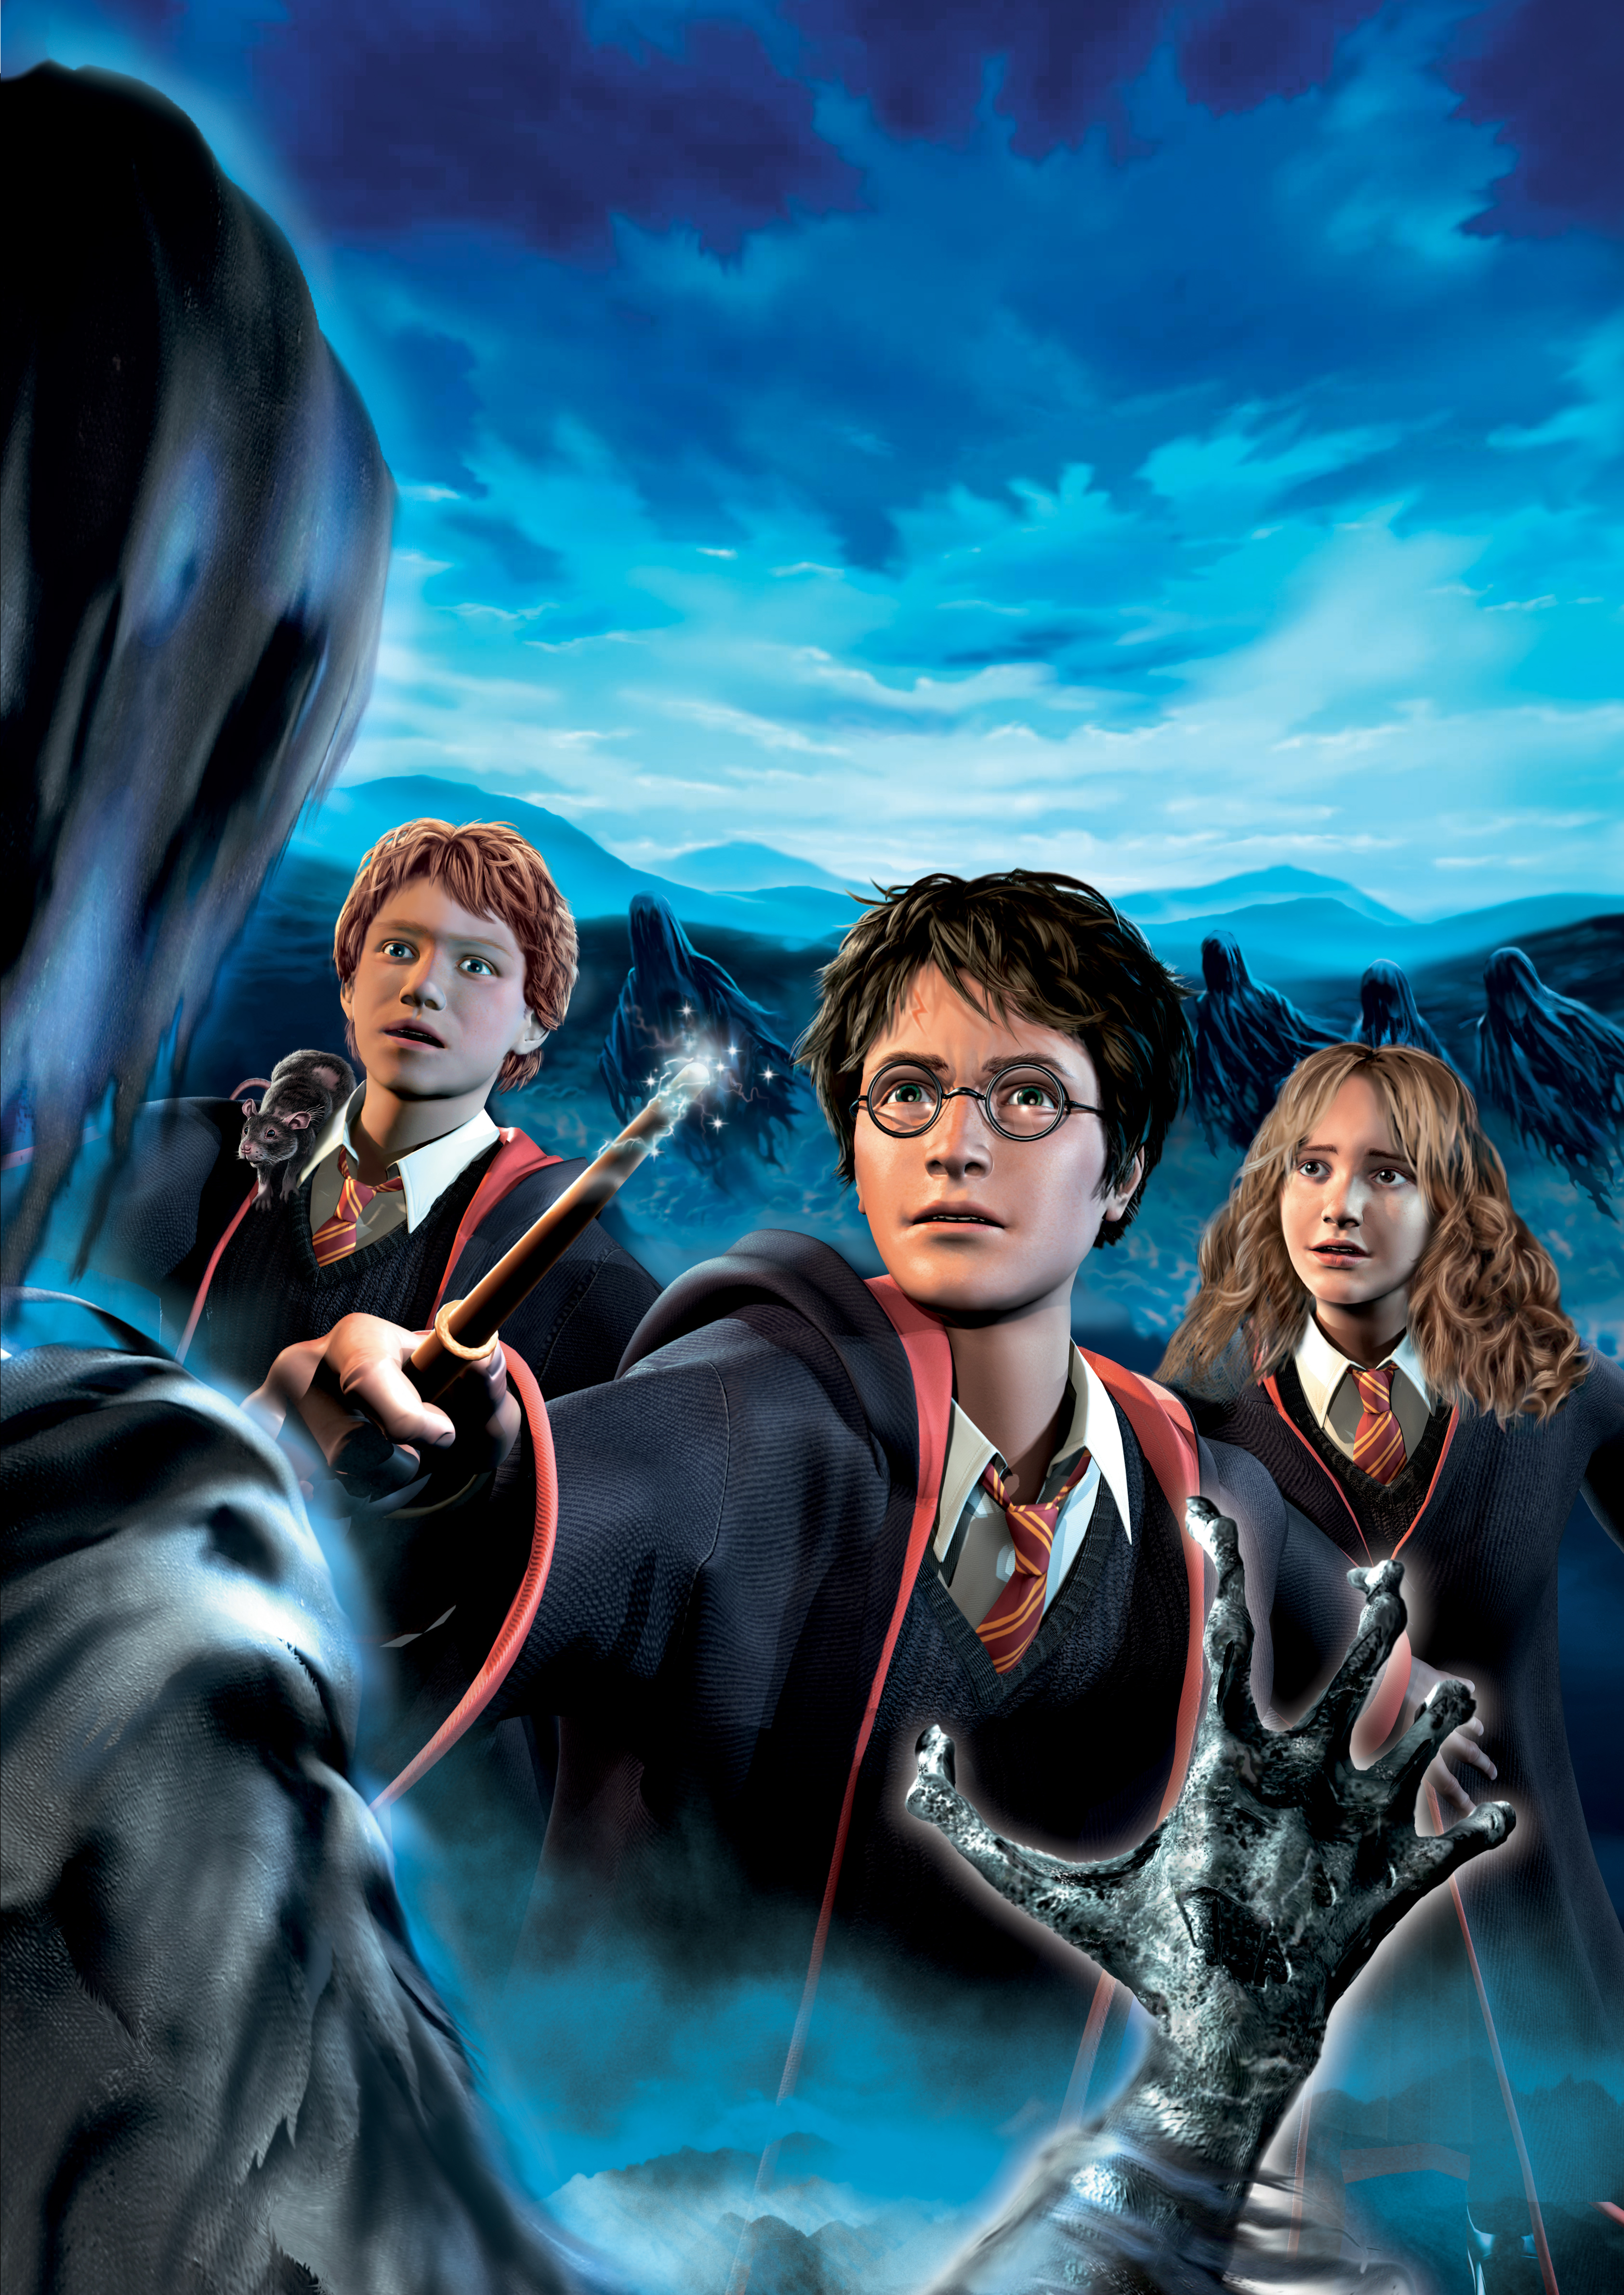 download harry potter game for free mac